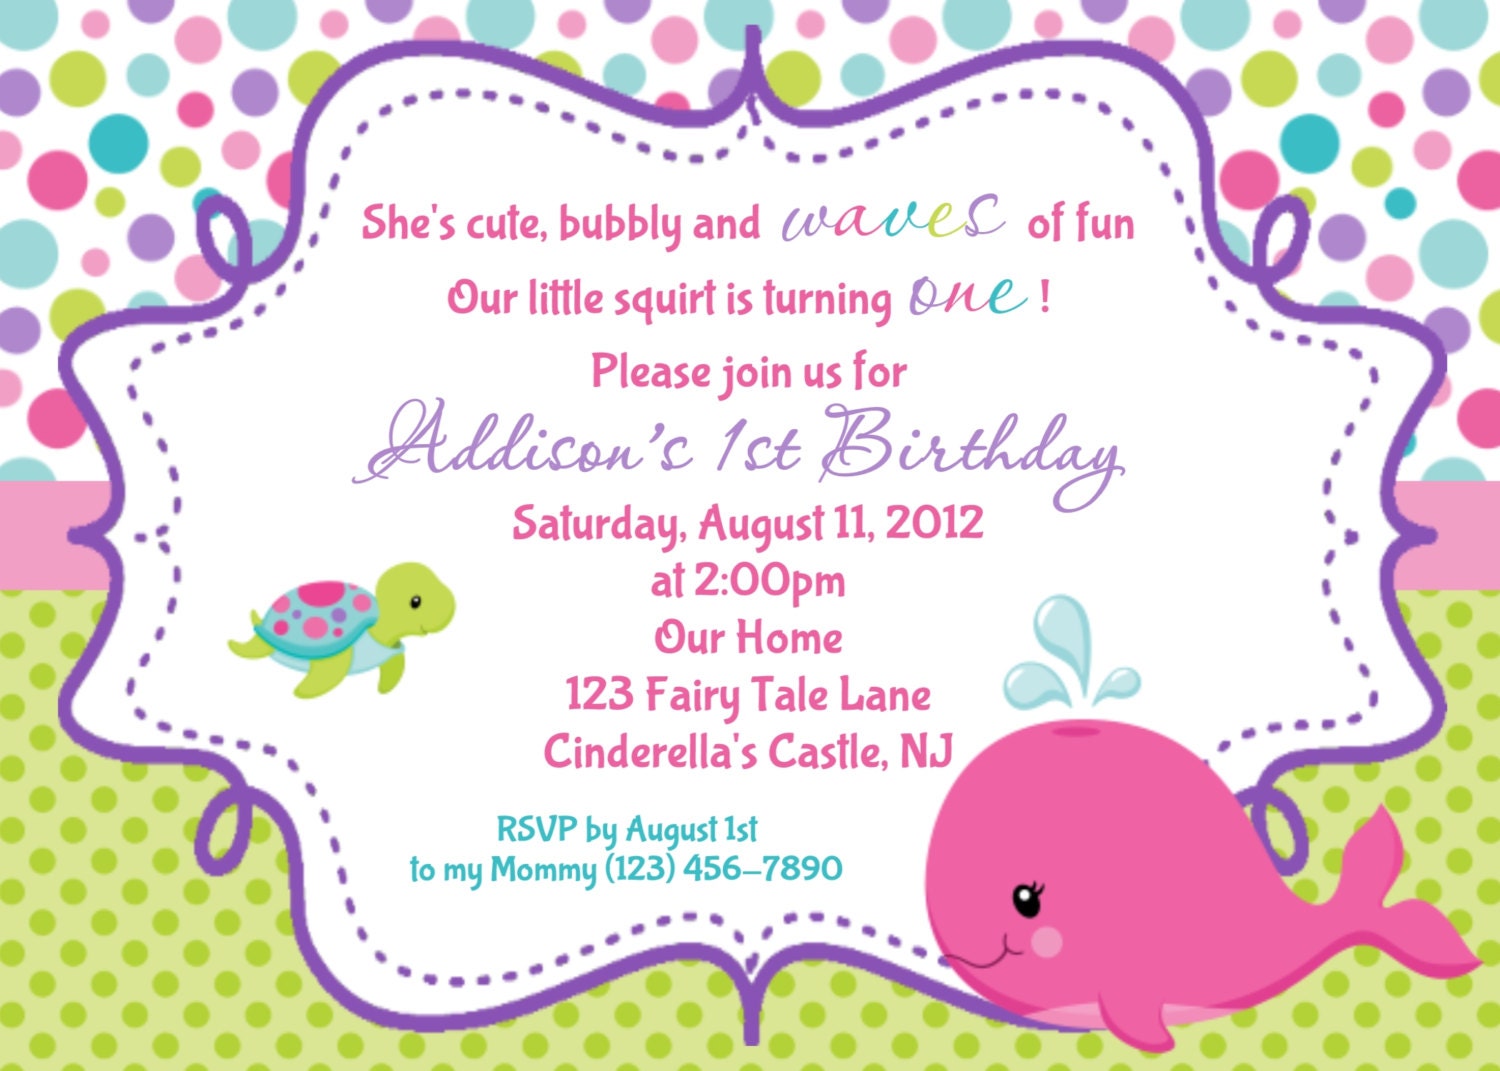 Whale Birthday Invitation Personalized by afairytalebeginning